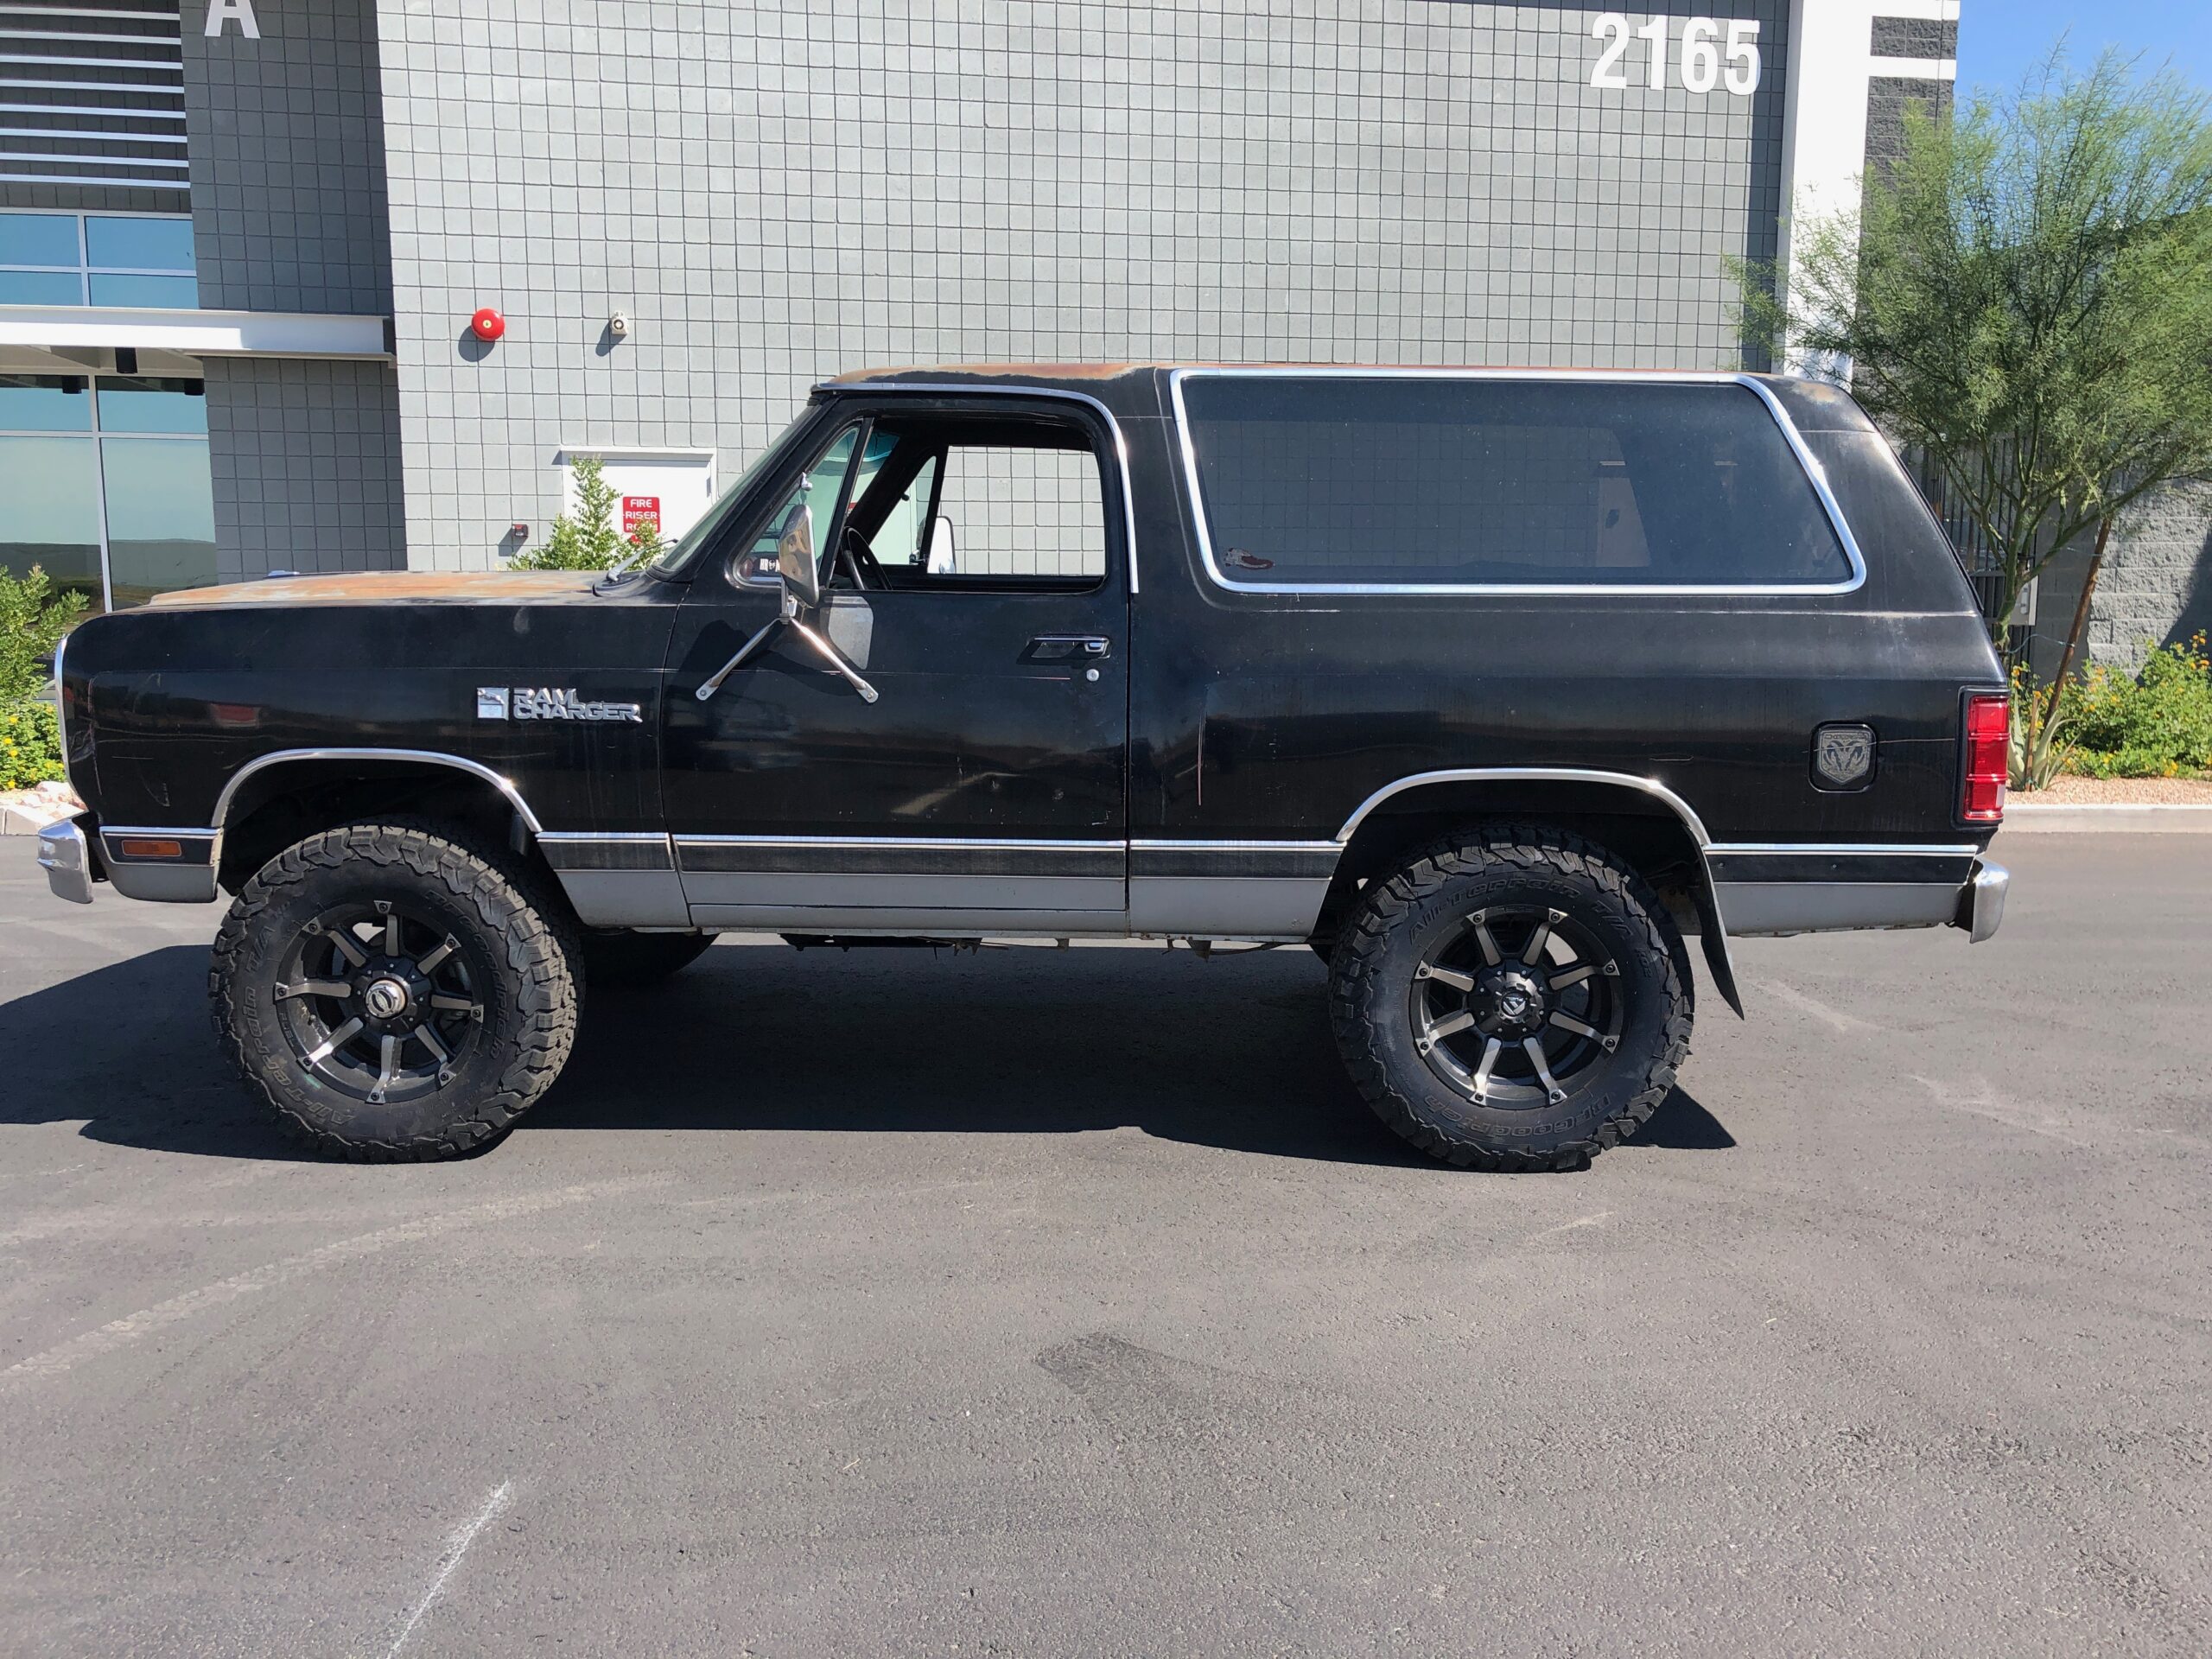 1983 Dodge Ram Charger image